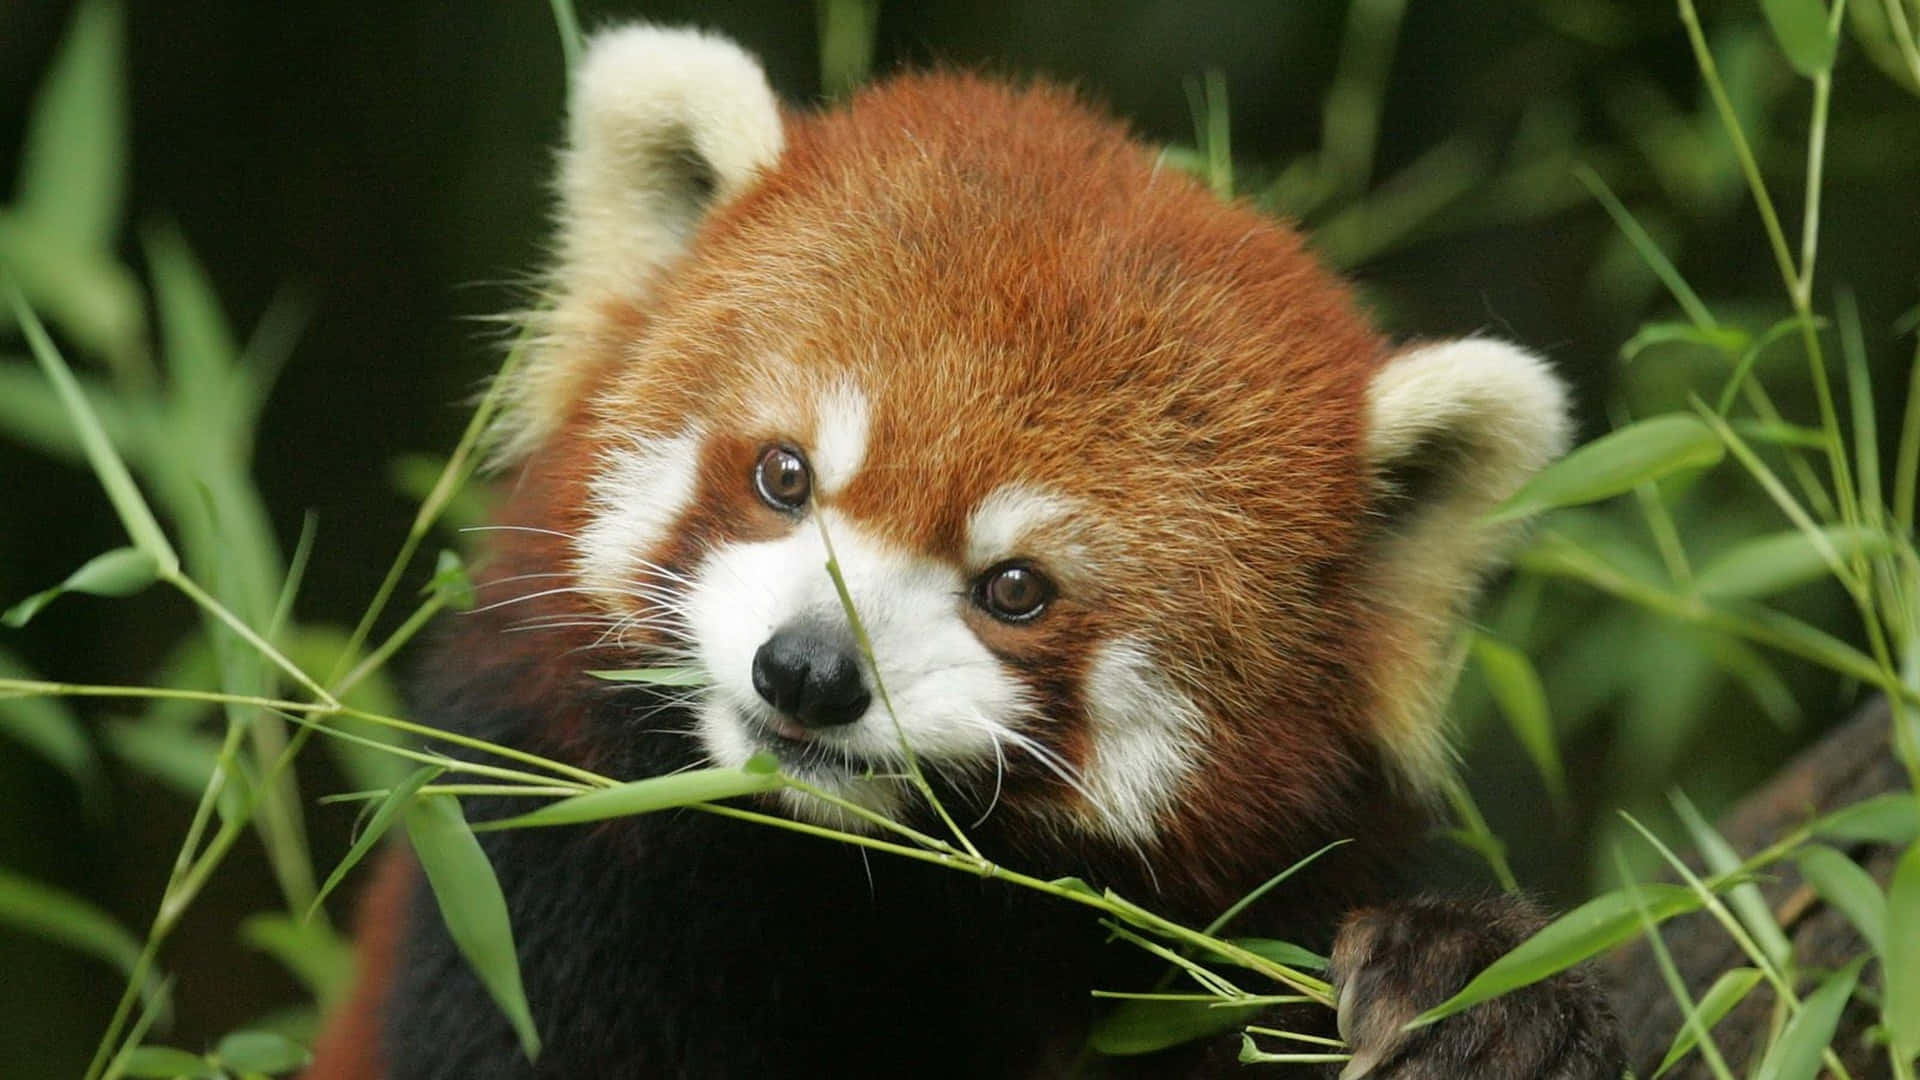 1.  Cute Red Panda Celebrating the Outdoors